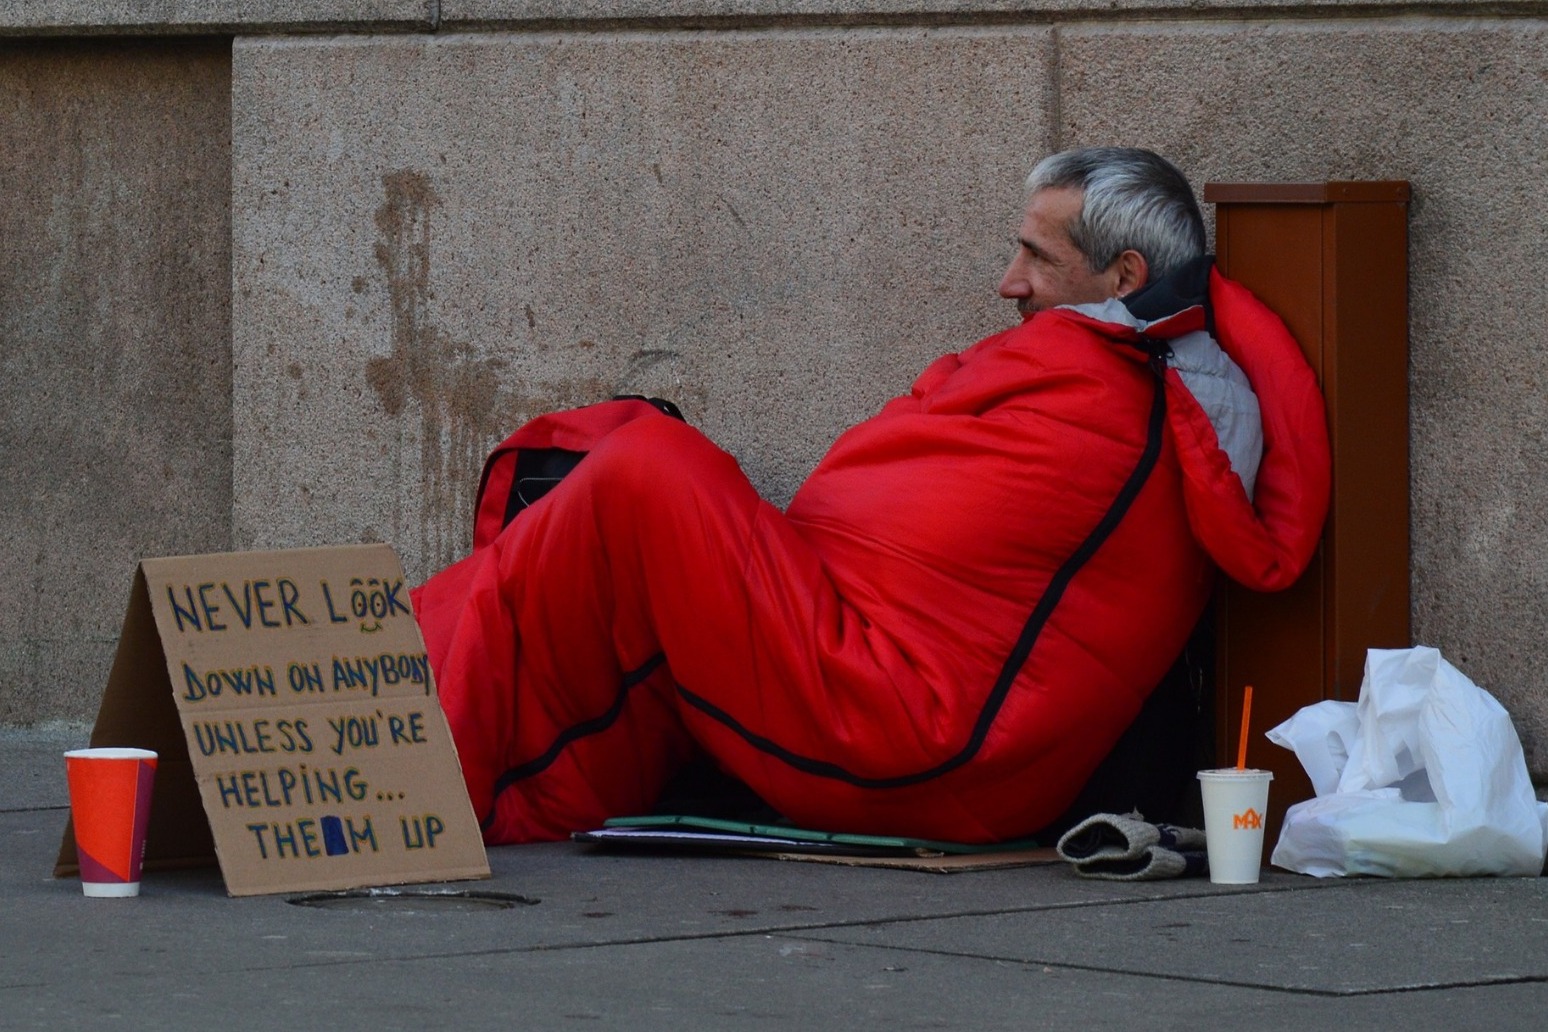 Government to provide 100 million to eradicate rough sleeping 